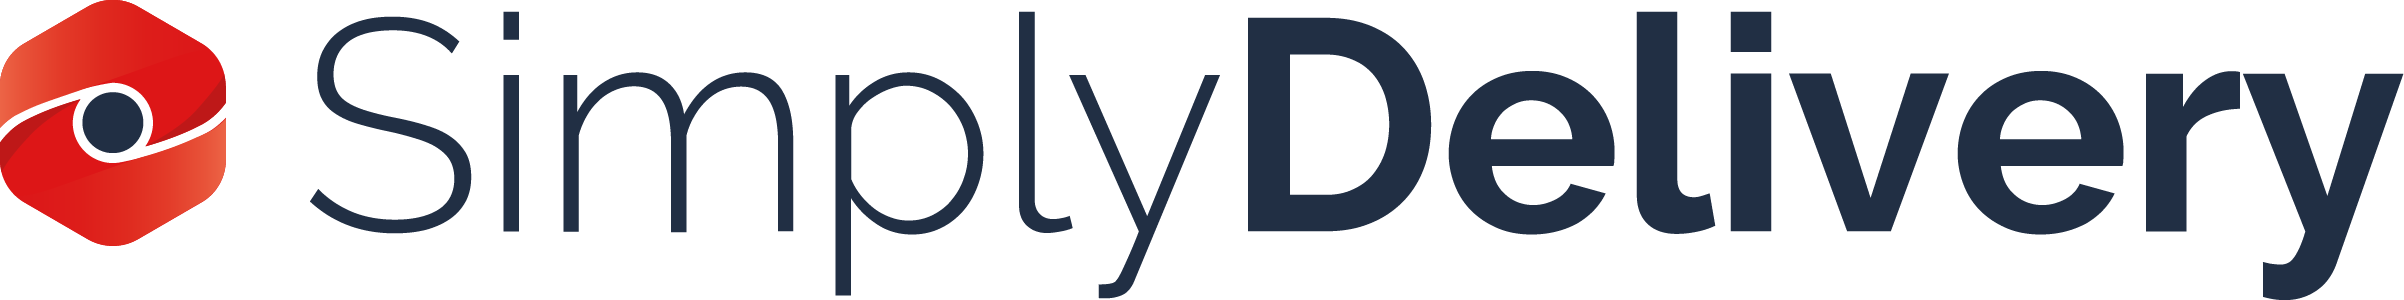 Simplydelivery Webshop Logo